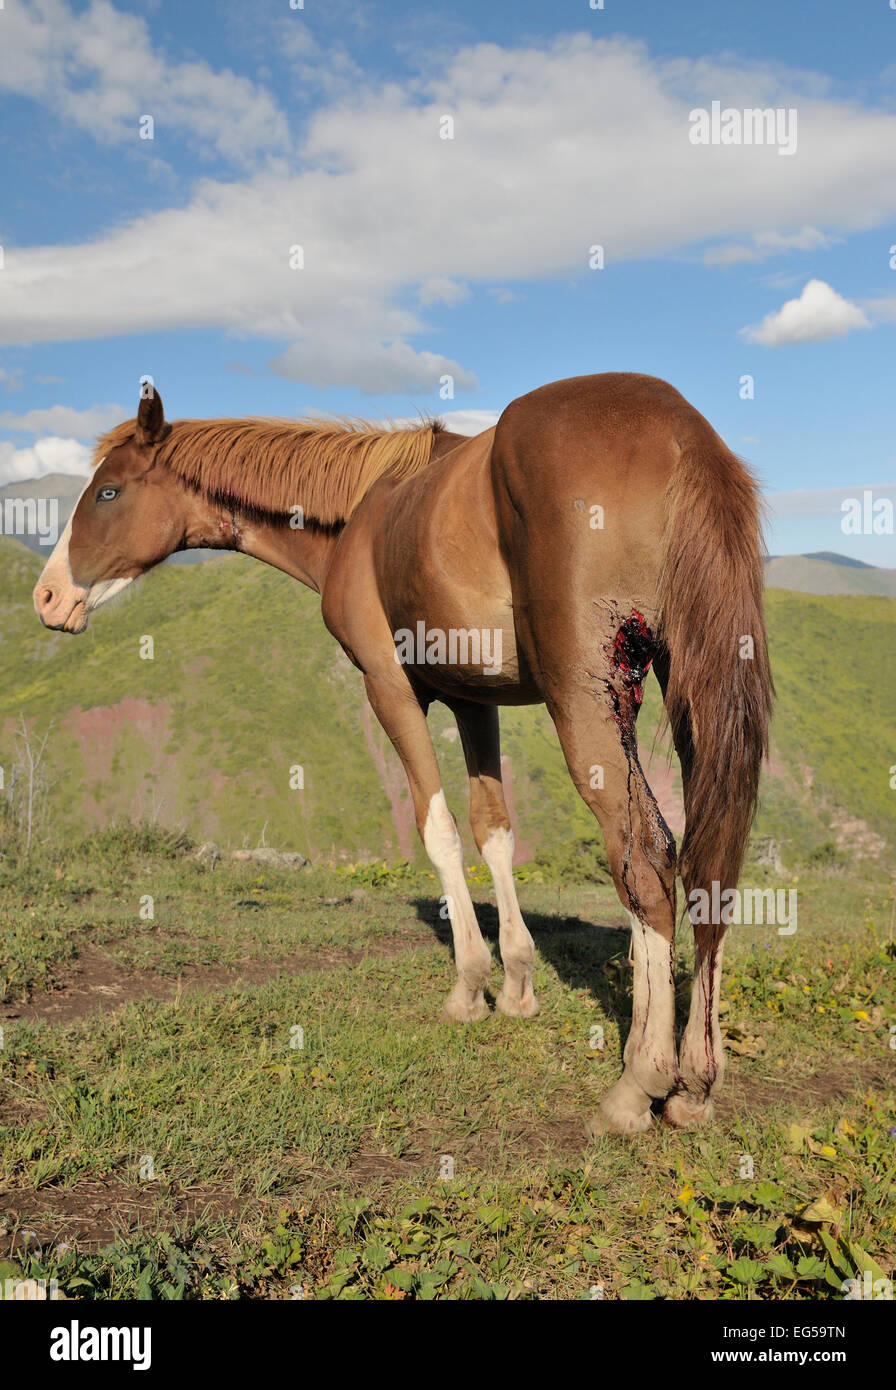 A horse right after wolfs attack in northern Kyrgyzstan. Stock Photo